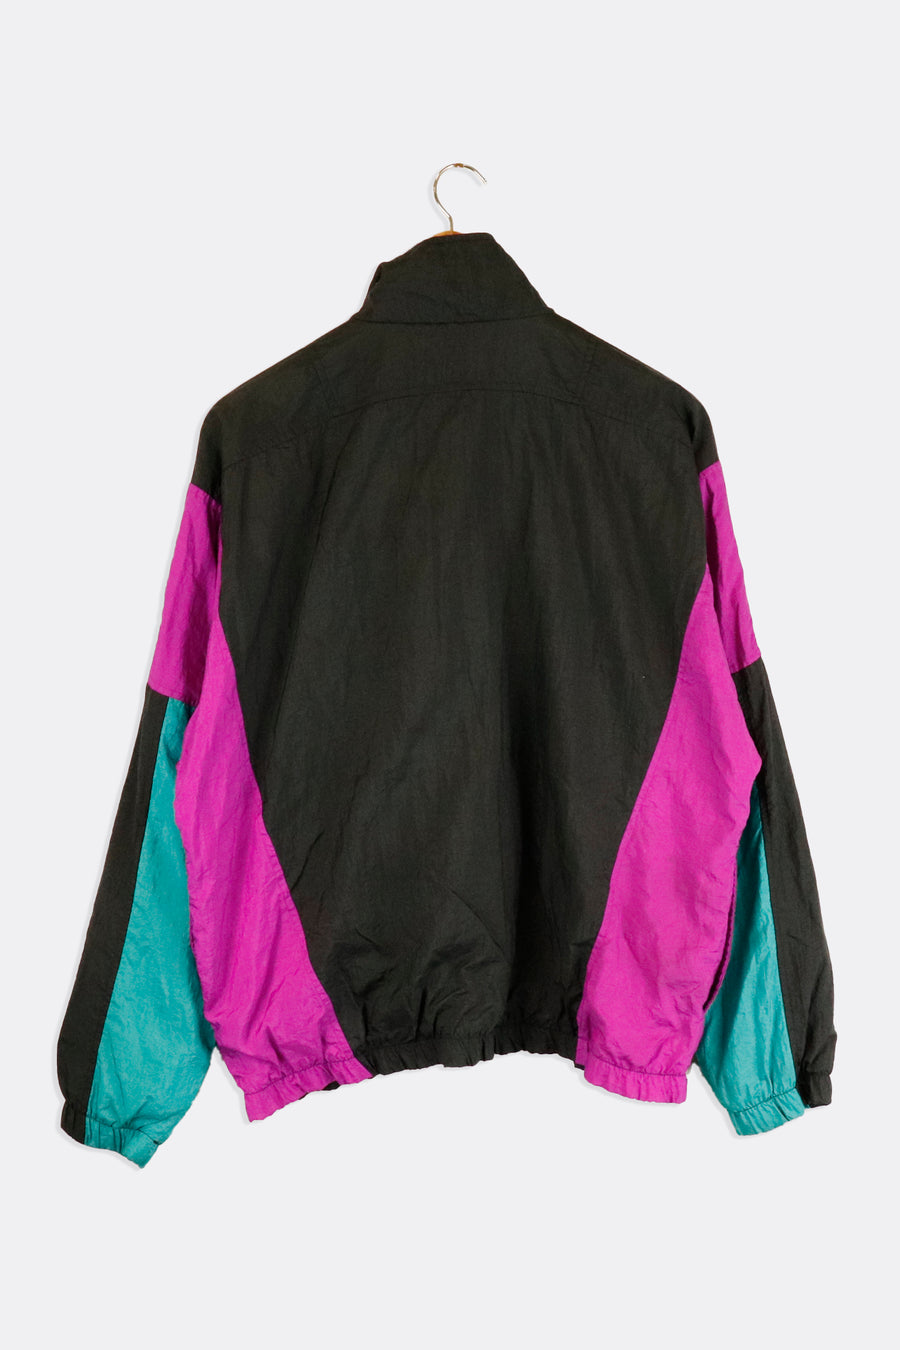 Vintage Nike Full Zip Blue Black And Purple Colour Block Embroidered Windbreaker Outerwear Sz L